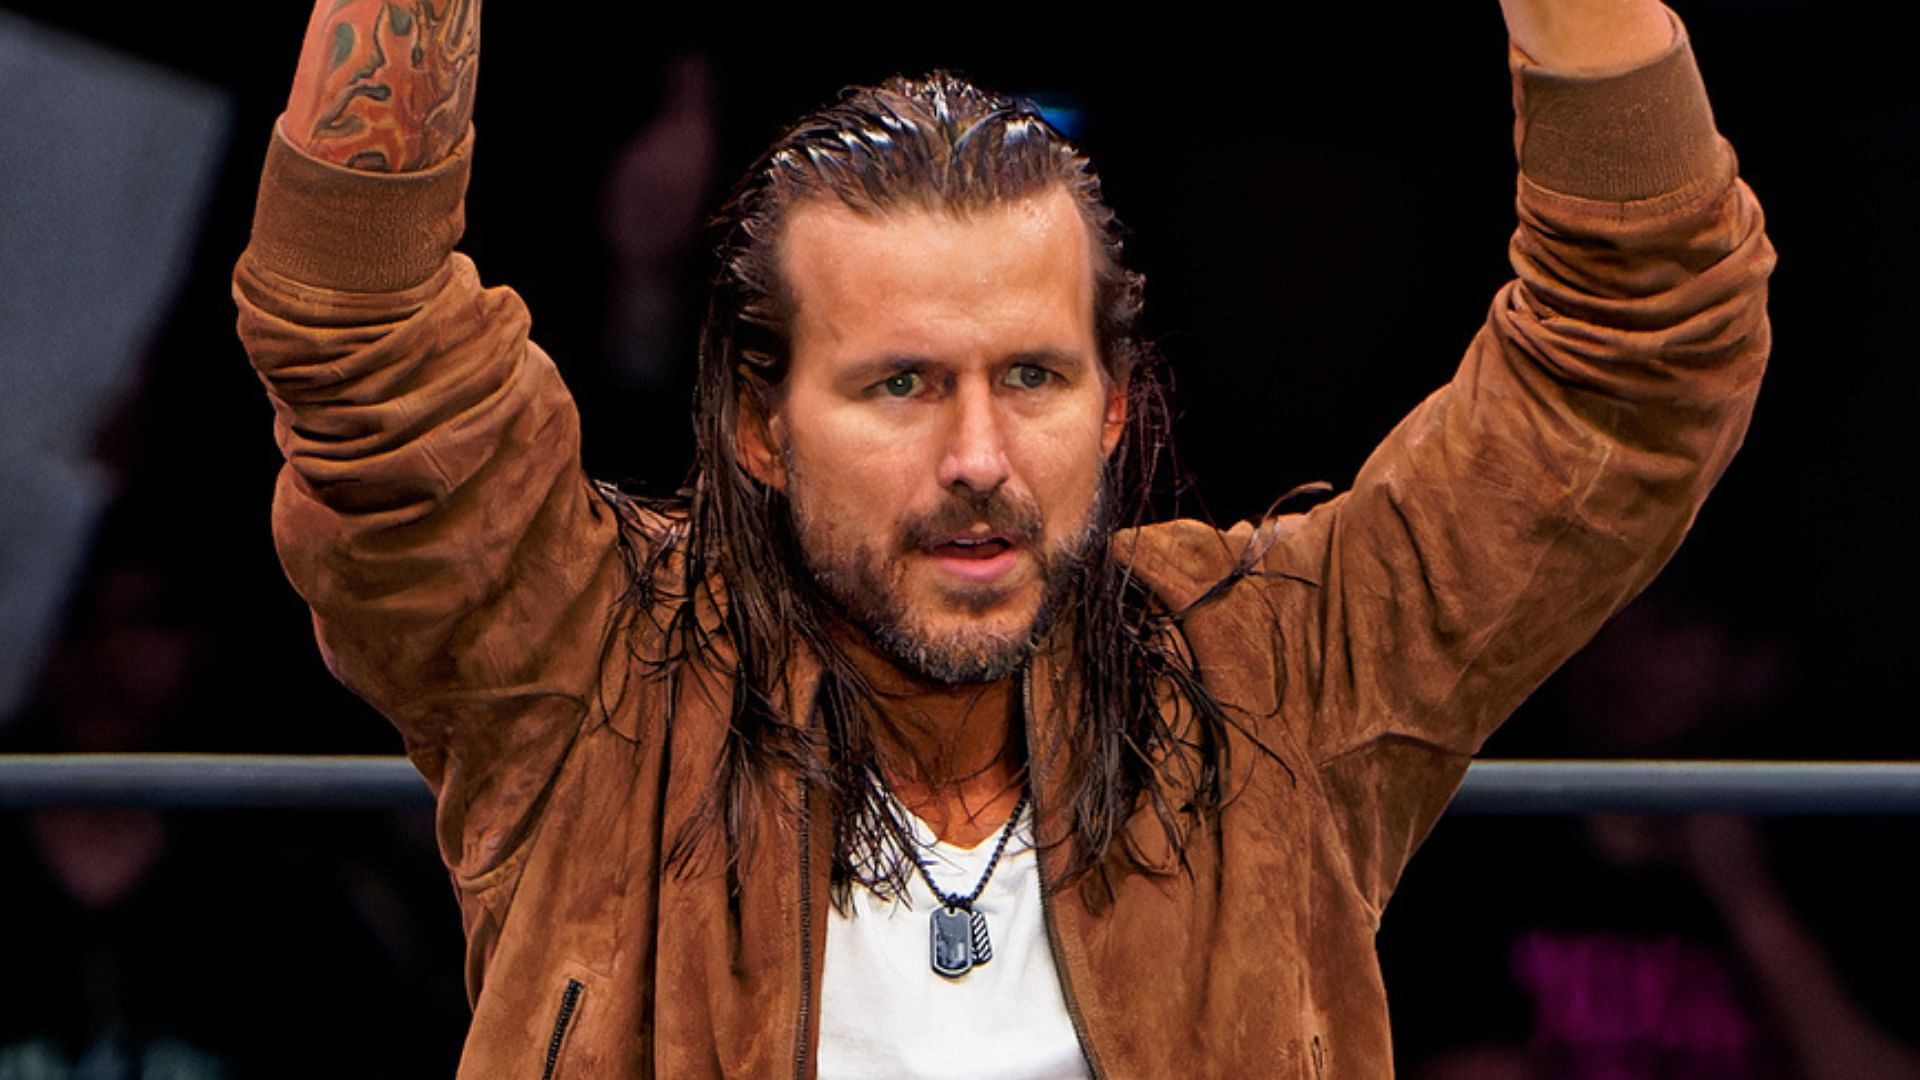 How many years does Adam Cole think he has left in the ring?